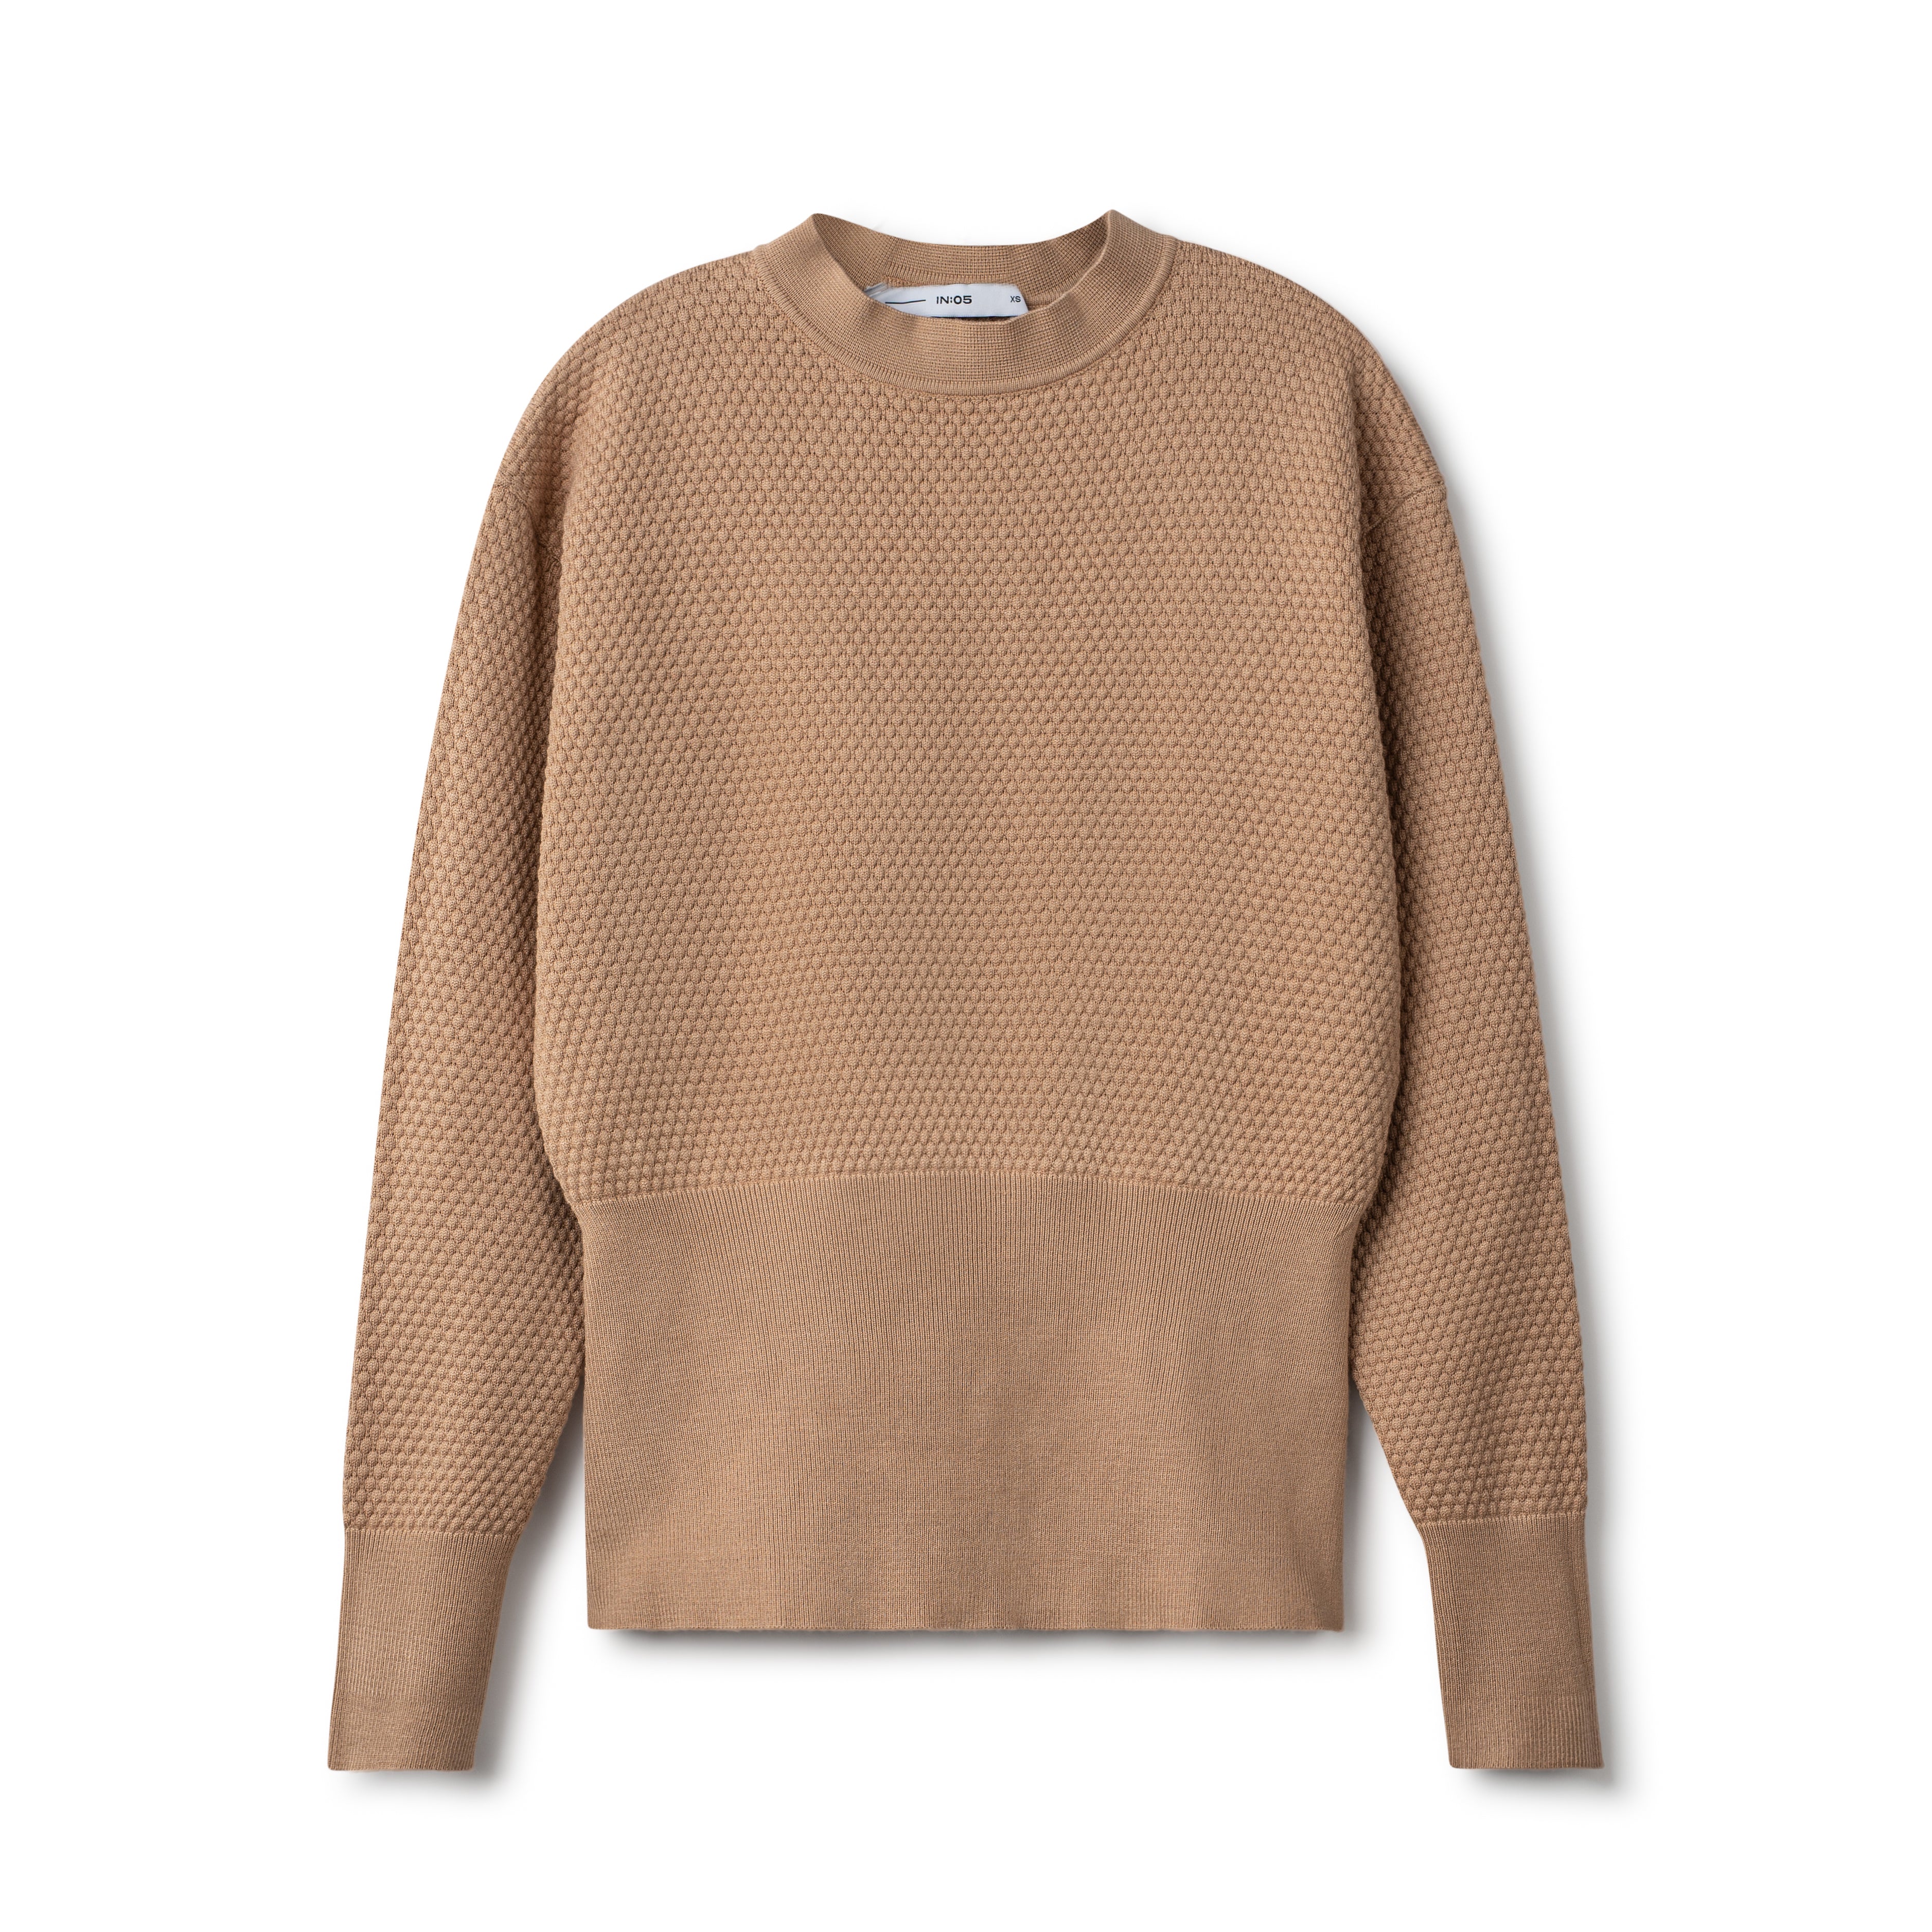 Textured Knit Sweater with Wide Waist Band - Camel